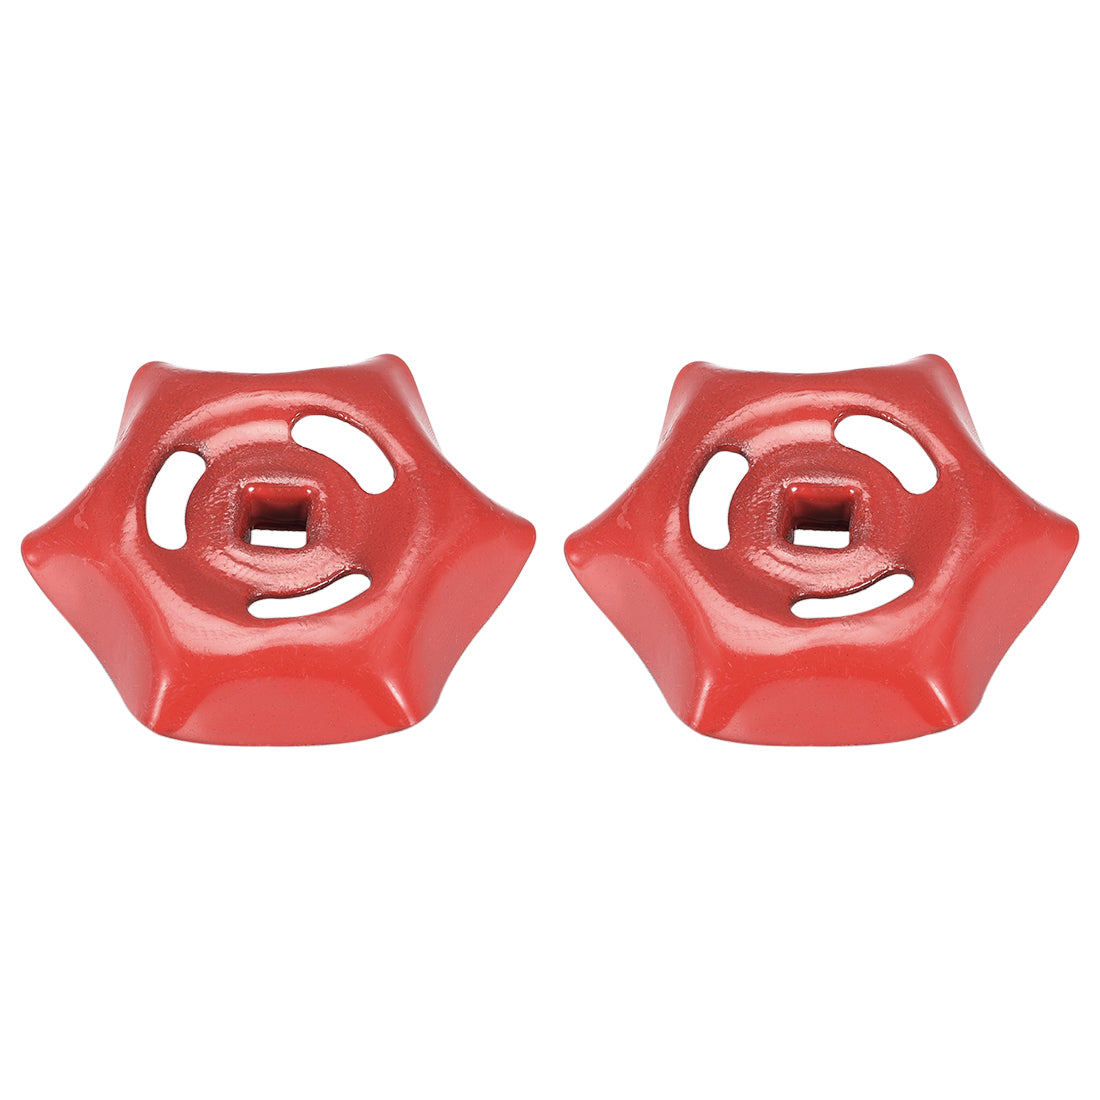 uxcell Uxcell Round Wheel Handle, Square Broach 6x6mm, Wheel OD 56mm Paint Iron Red 2Pcs